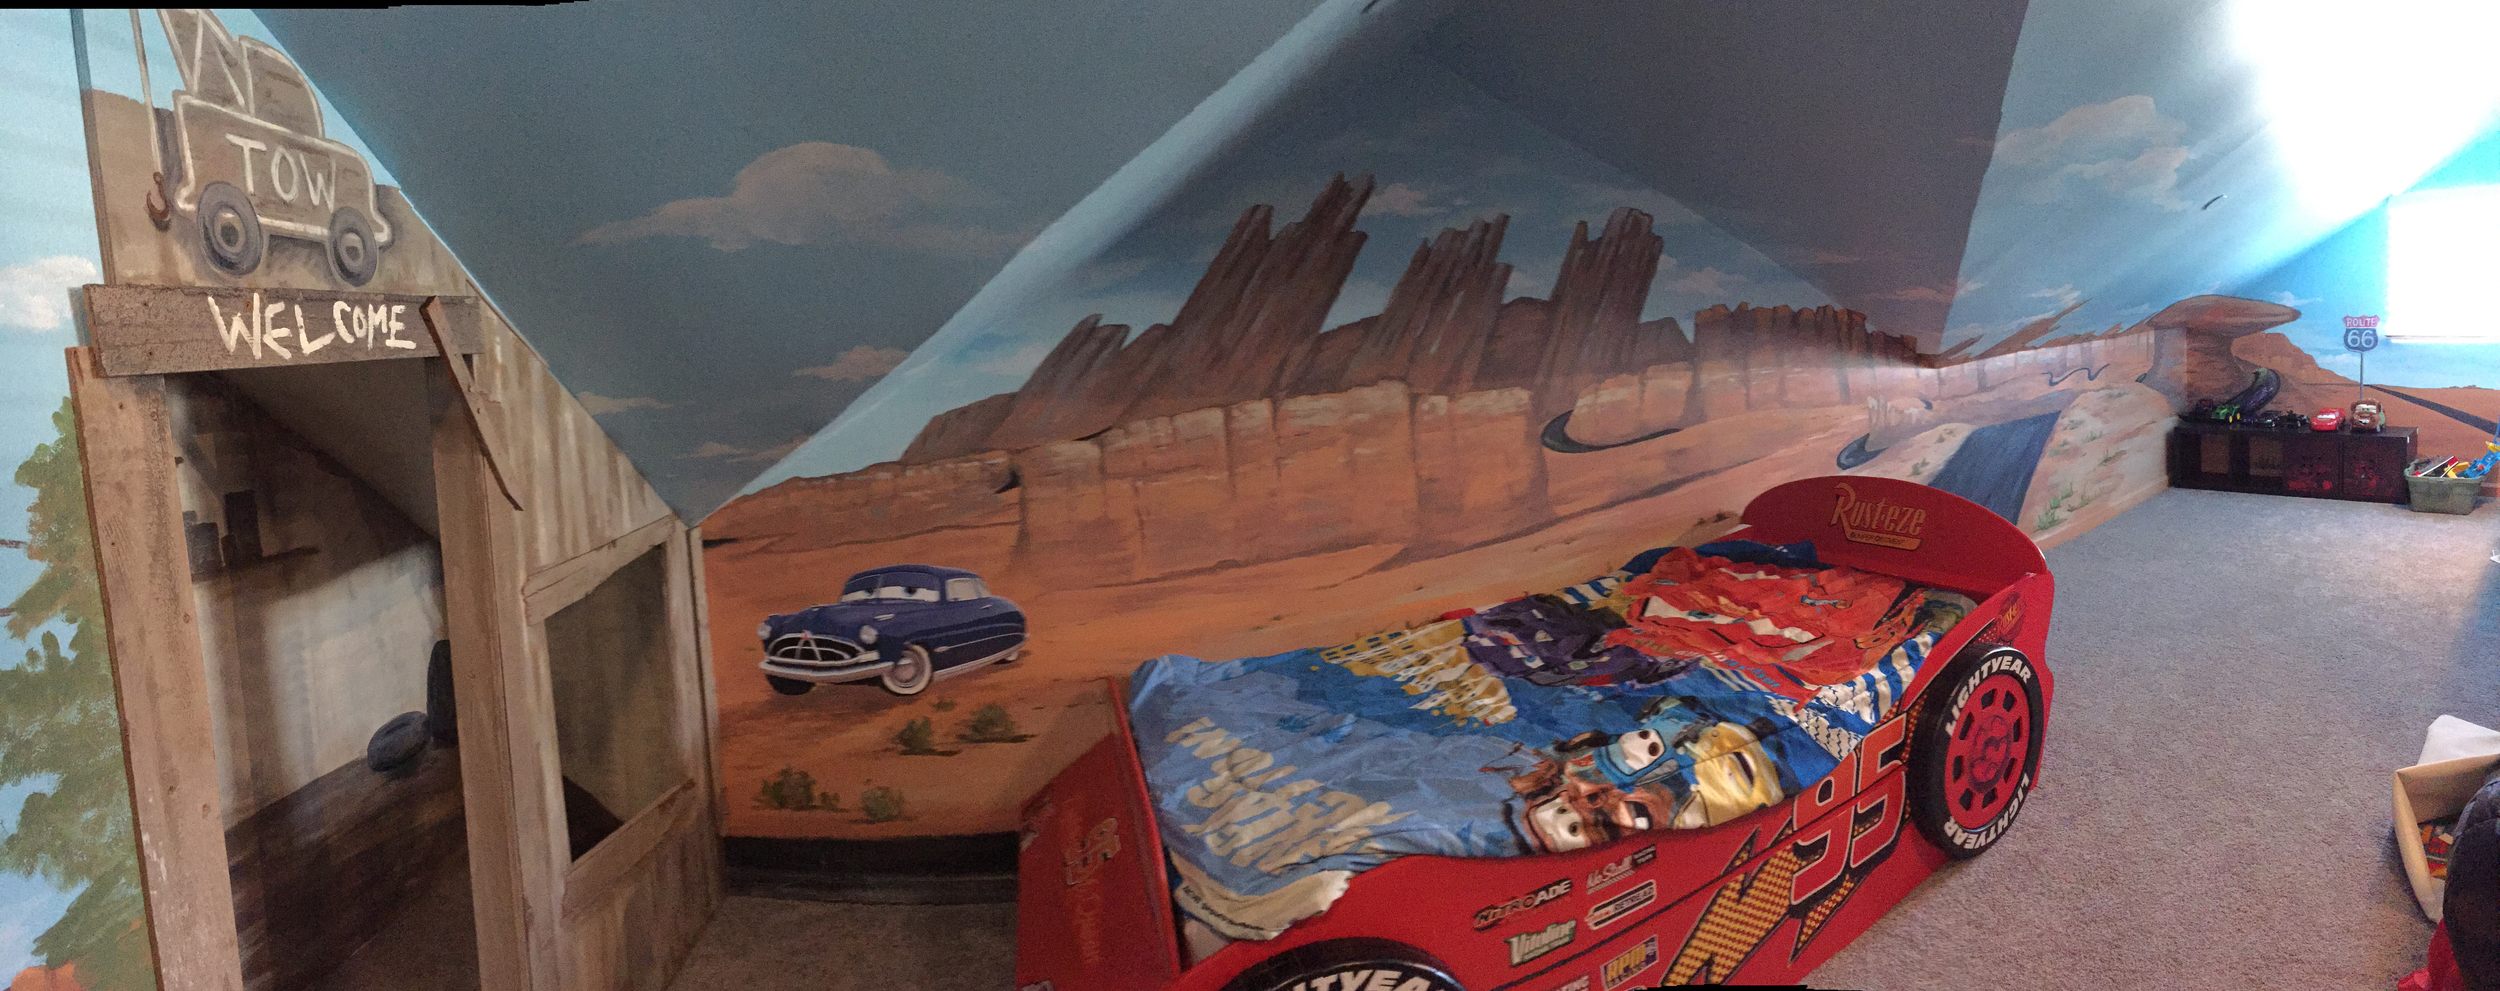 Disney CARS Themed Playspace/Bedroom with Mural